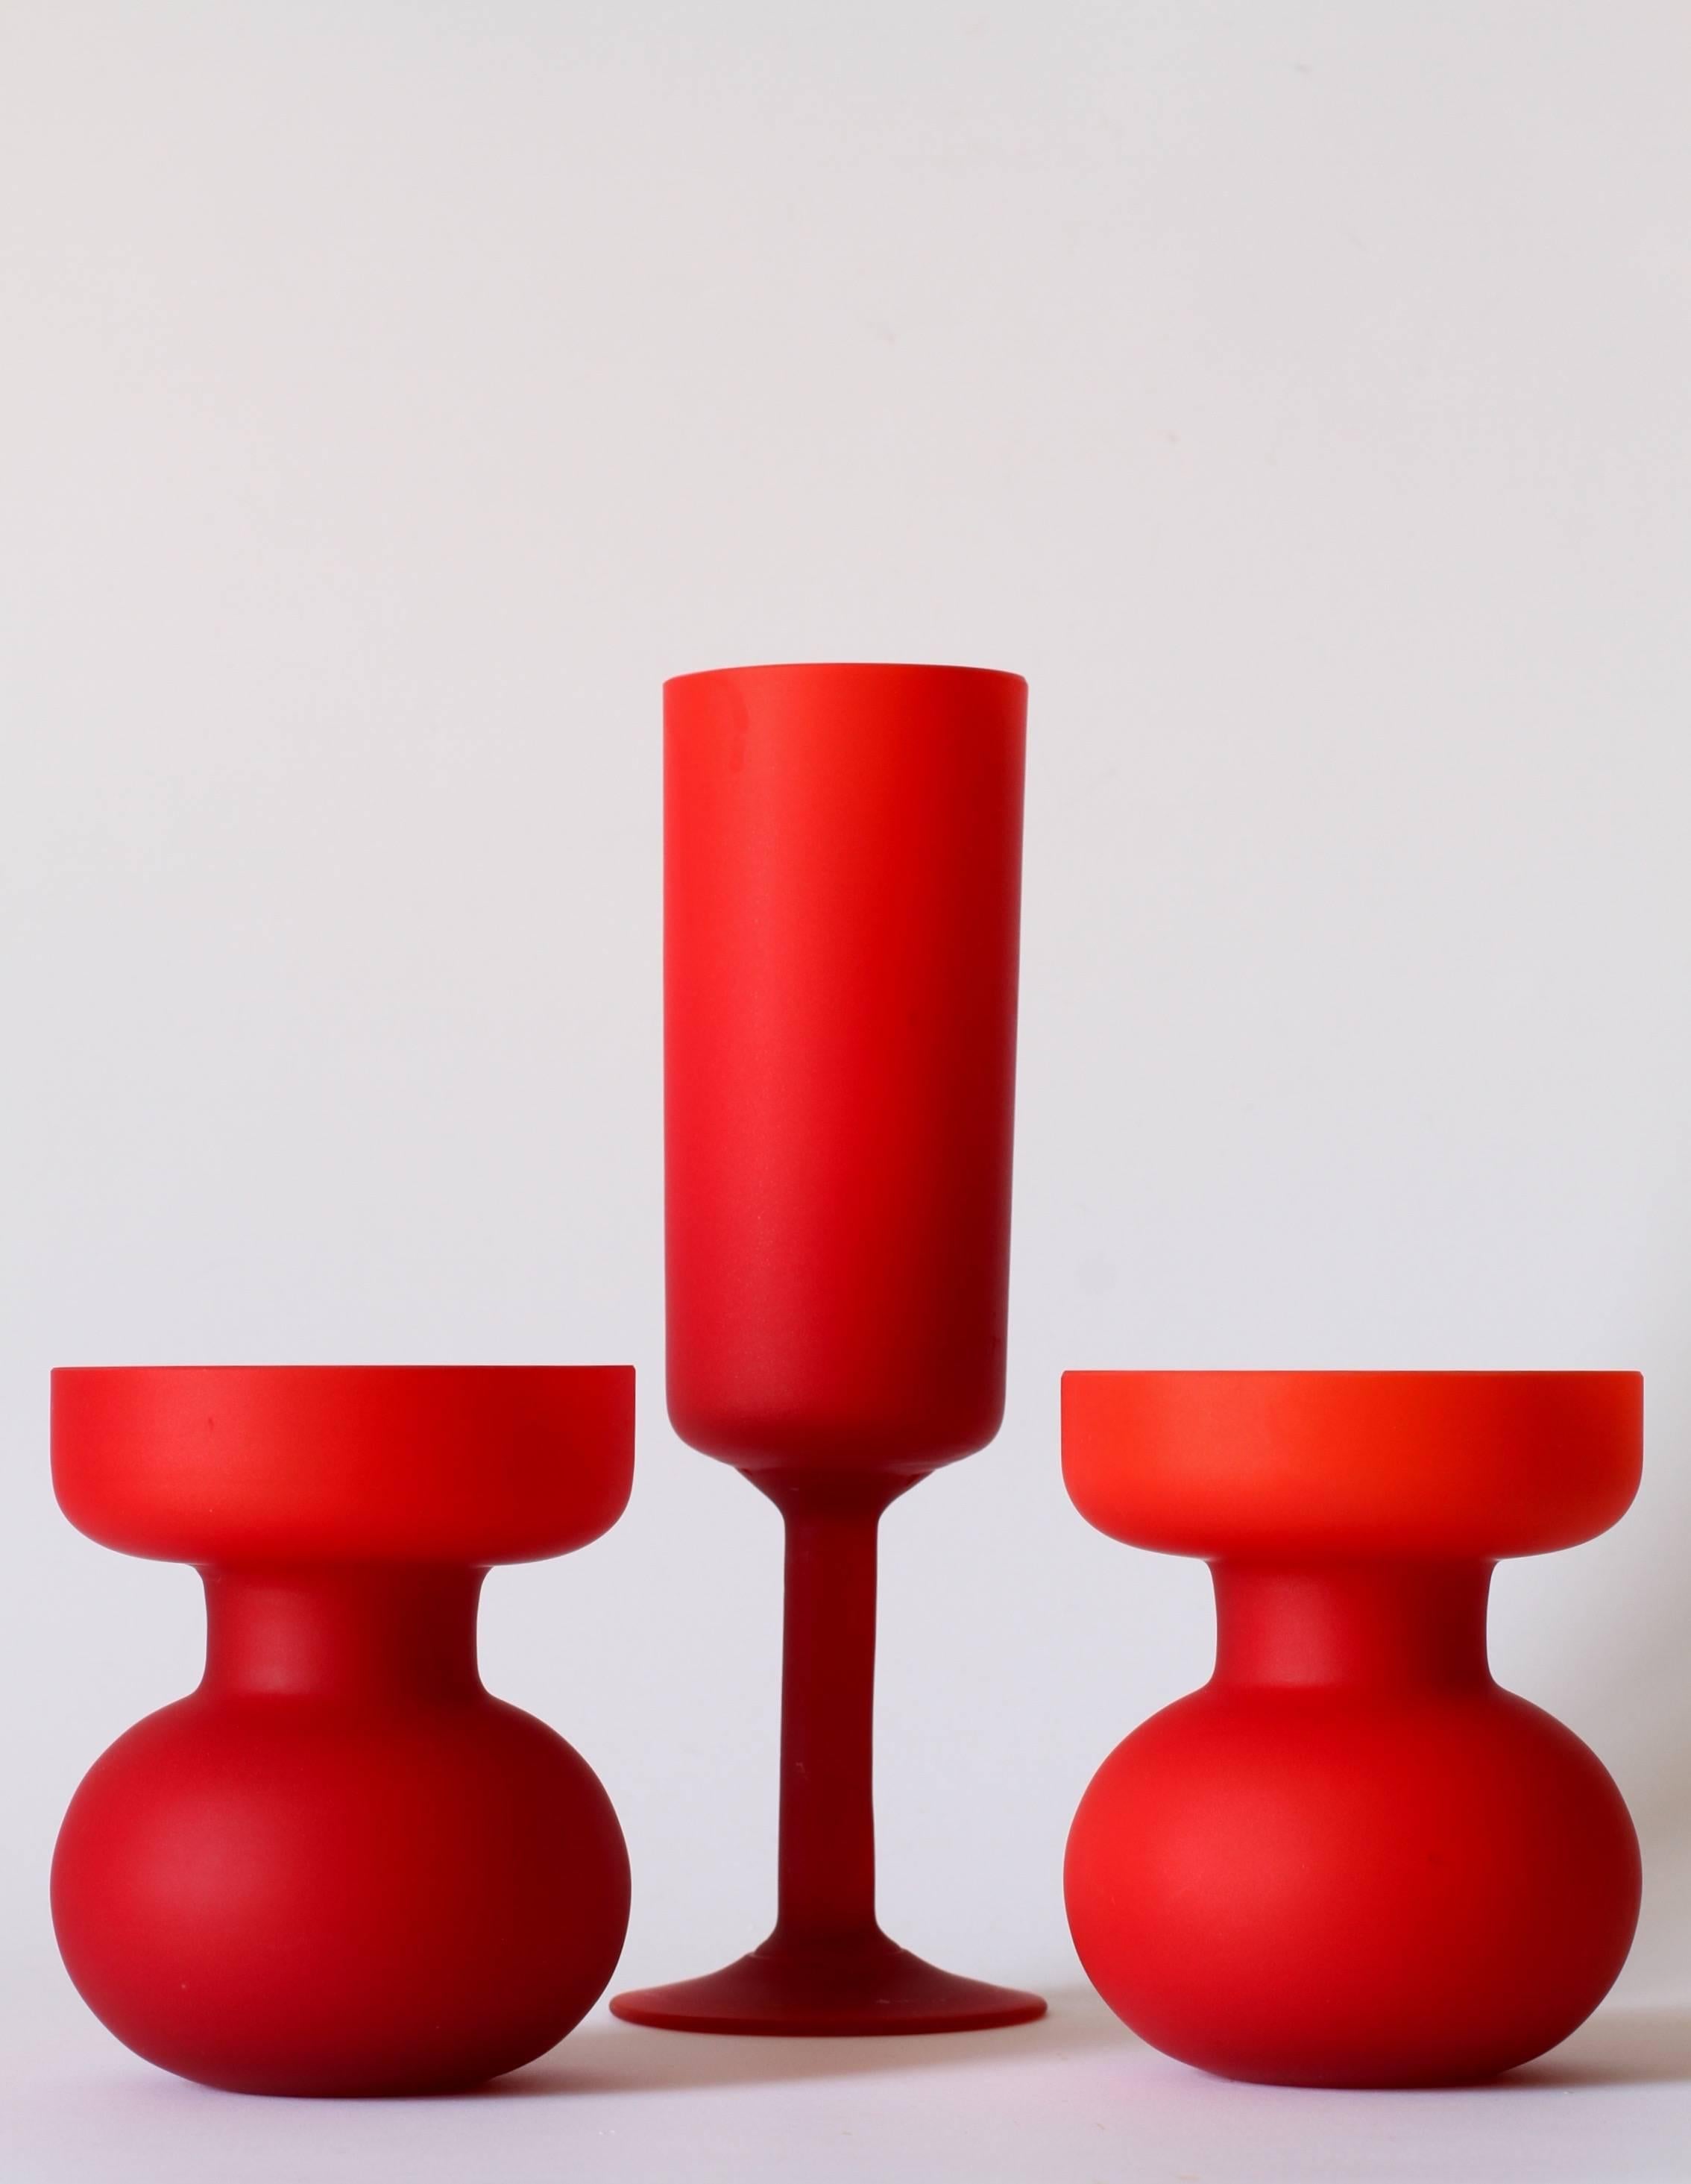 Vibrant set of three vases and vessels by Carlo Moretti, circa 1970. The set includes two small round vases perfect for growing hyacinths and a single goblet or vase. This is a perfect example of Moretti's best work with, not only, the beautiful